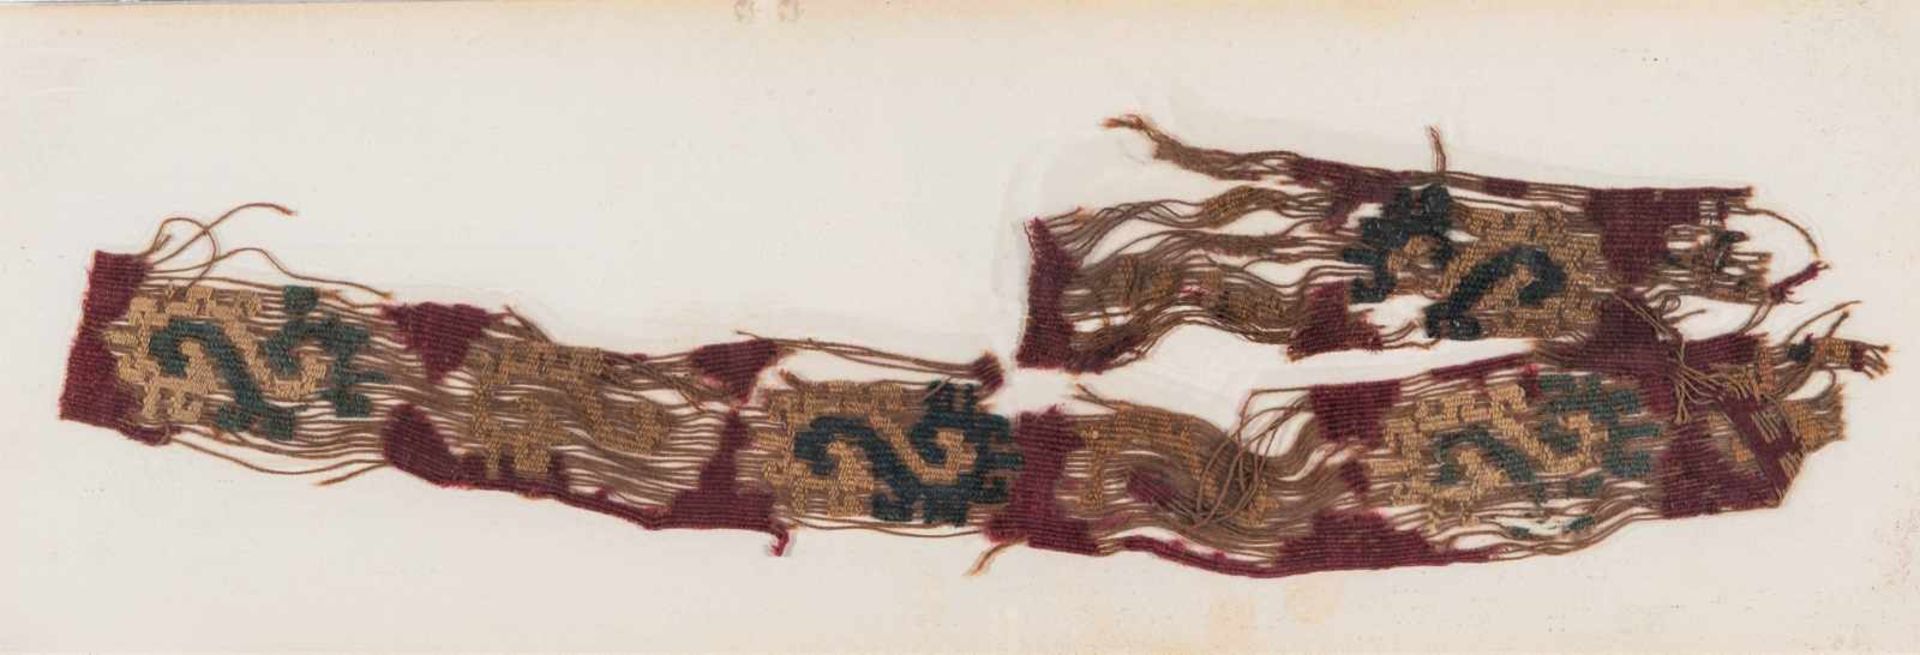 3 TEXTILE FRAGMENTS AND 1 BAND – NAZCA AND CHANCAY CULTUREWoven FabricNazca culture, Peru, c. 100 BC - Image 4 of 5